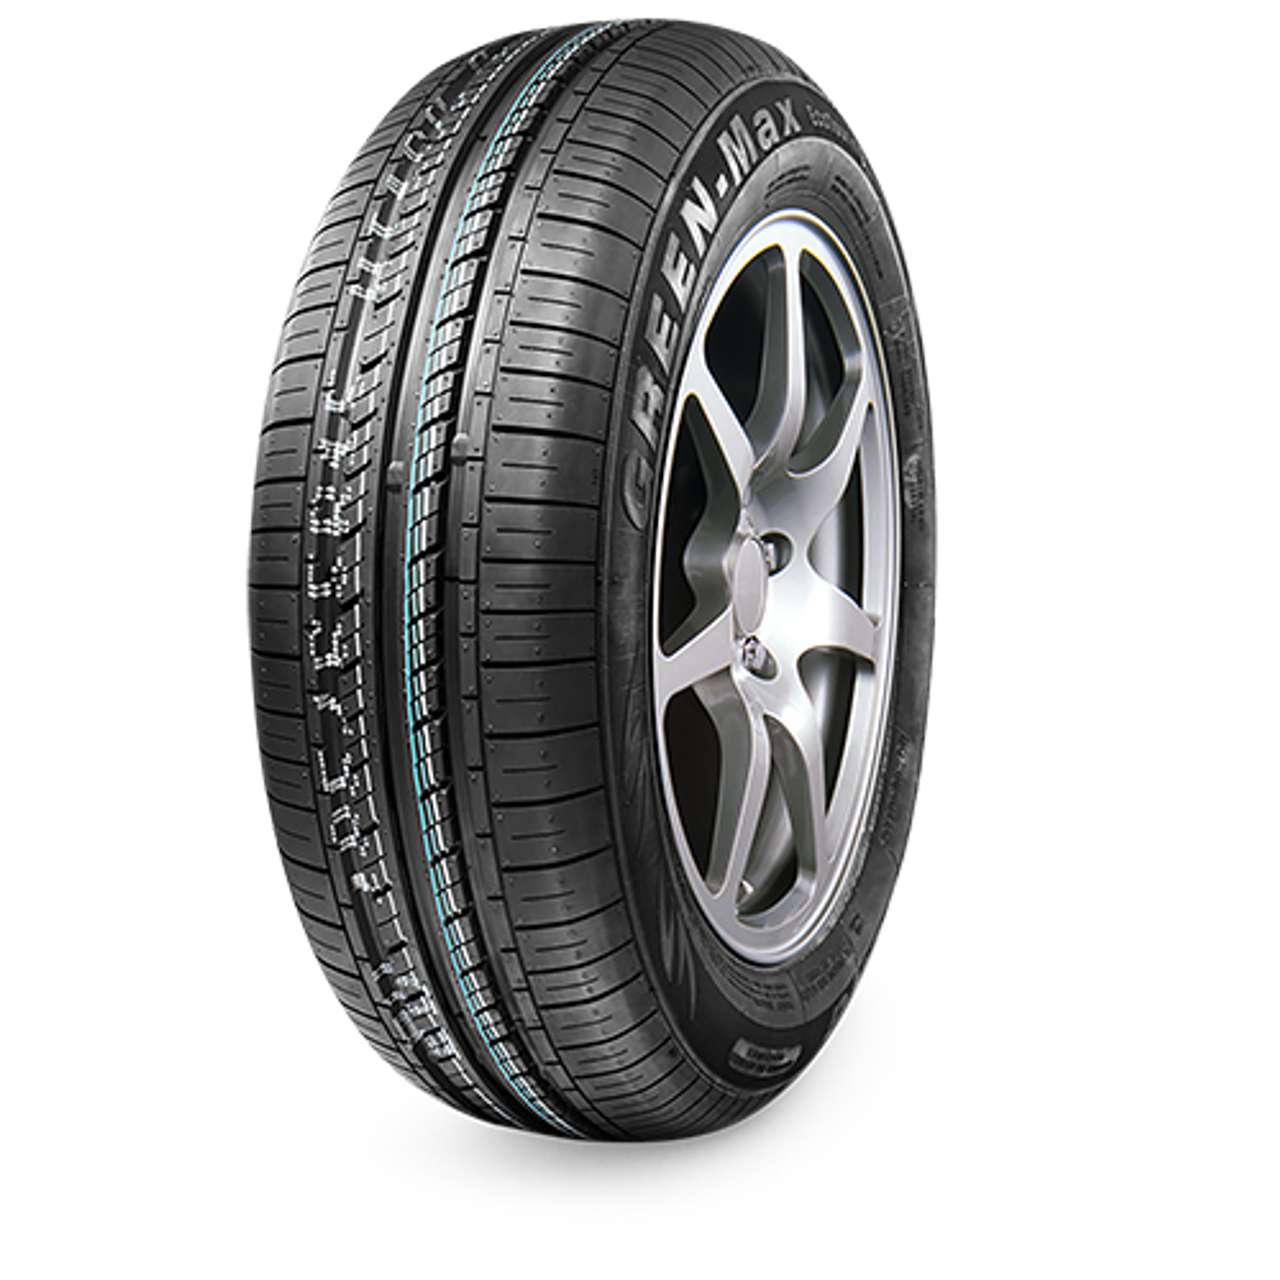 LINGLONG GREEN-MAX ECOTOURING 155/80R13 79T BSW von LINGLONG